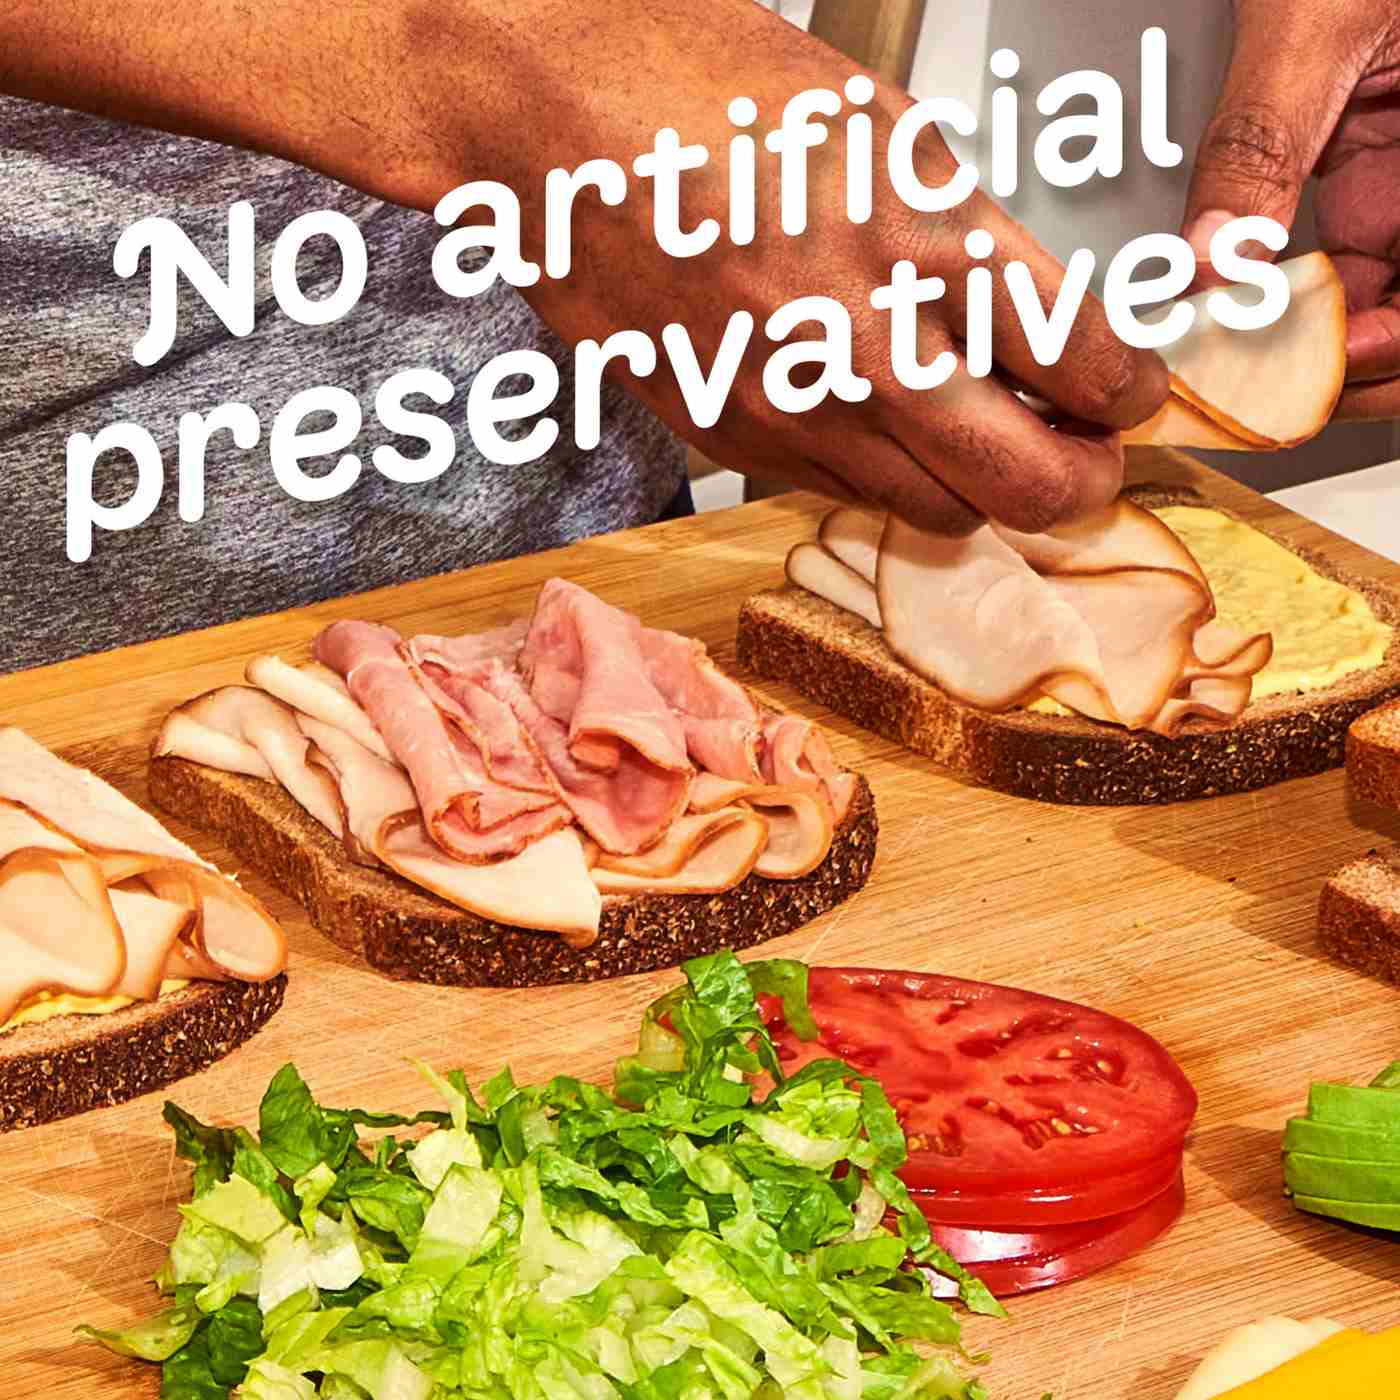 Oscar Mayer Deli Fresh Oven Roasted Turkey Breast & Smoked Uncured Sliced Ham Lunch Meats - Family Pack; image 2 of 6